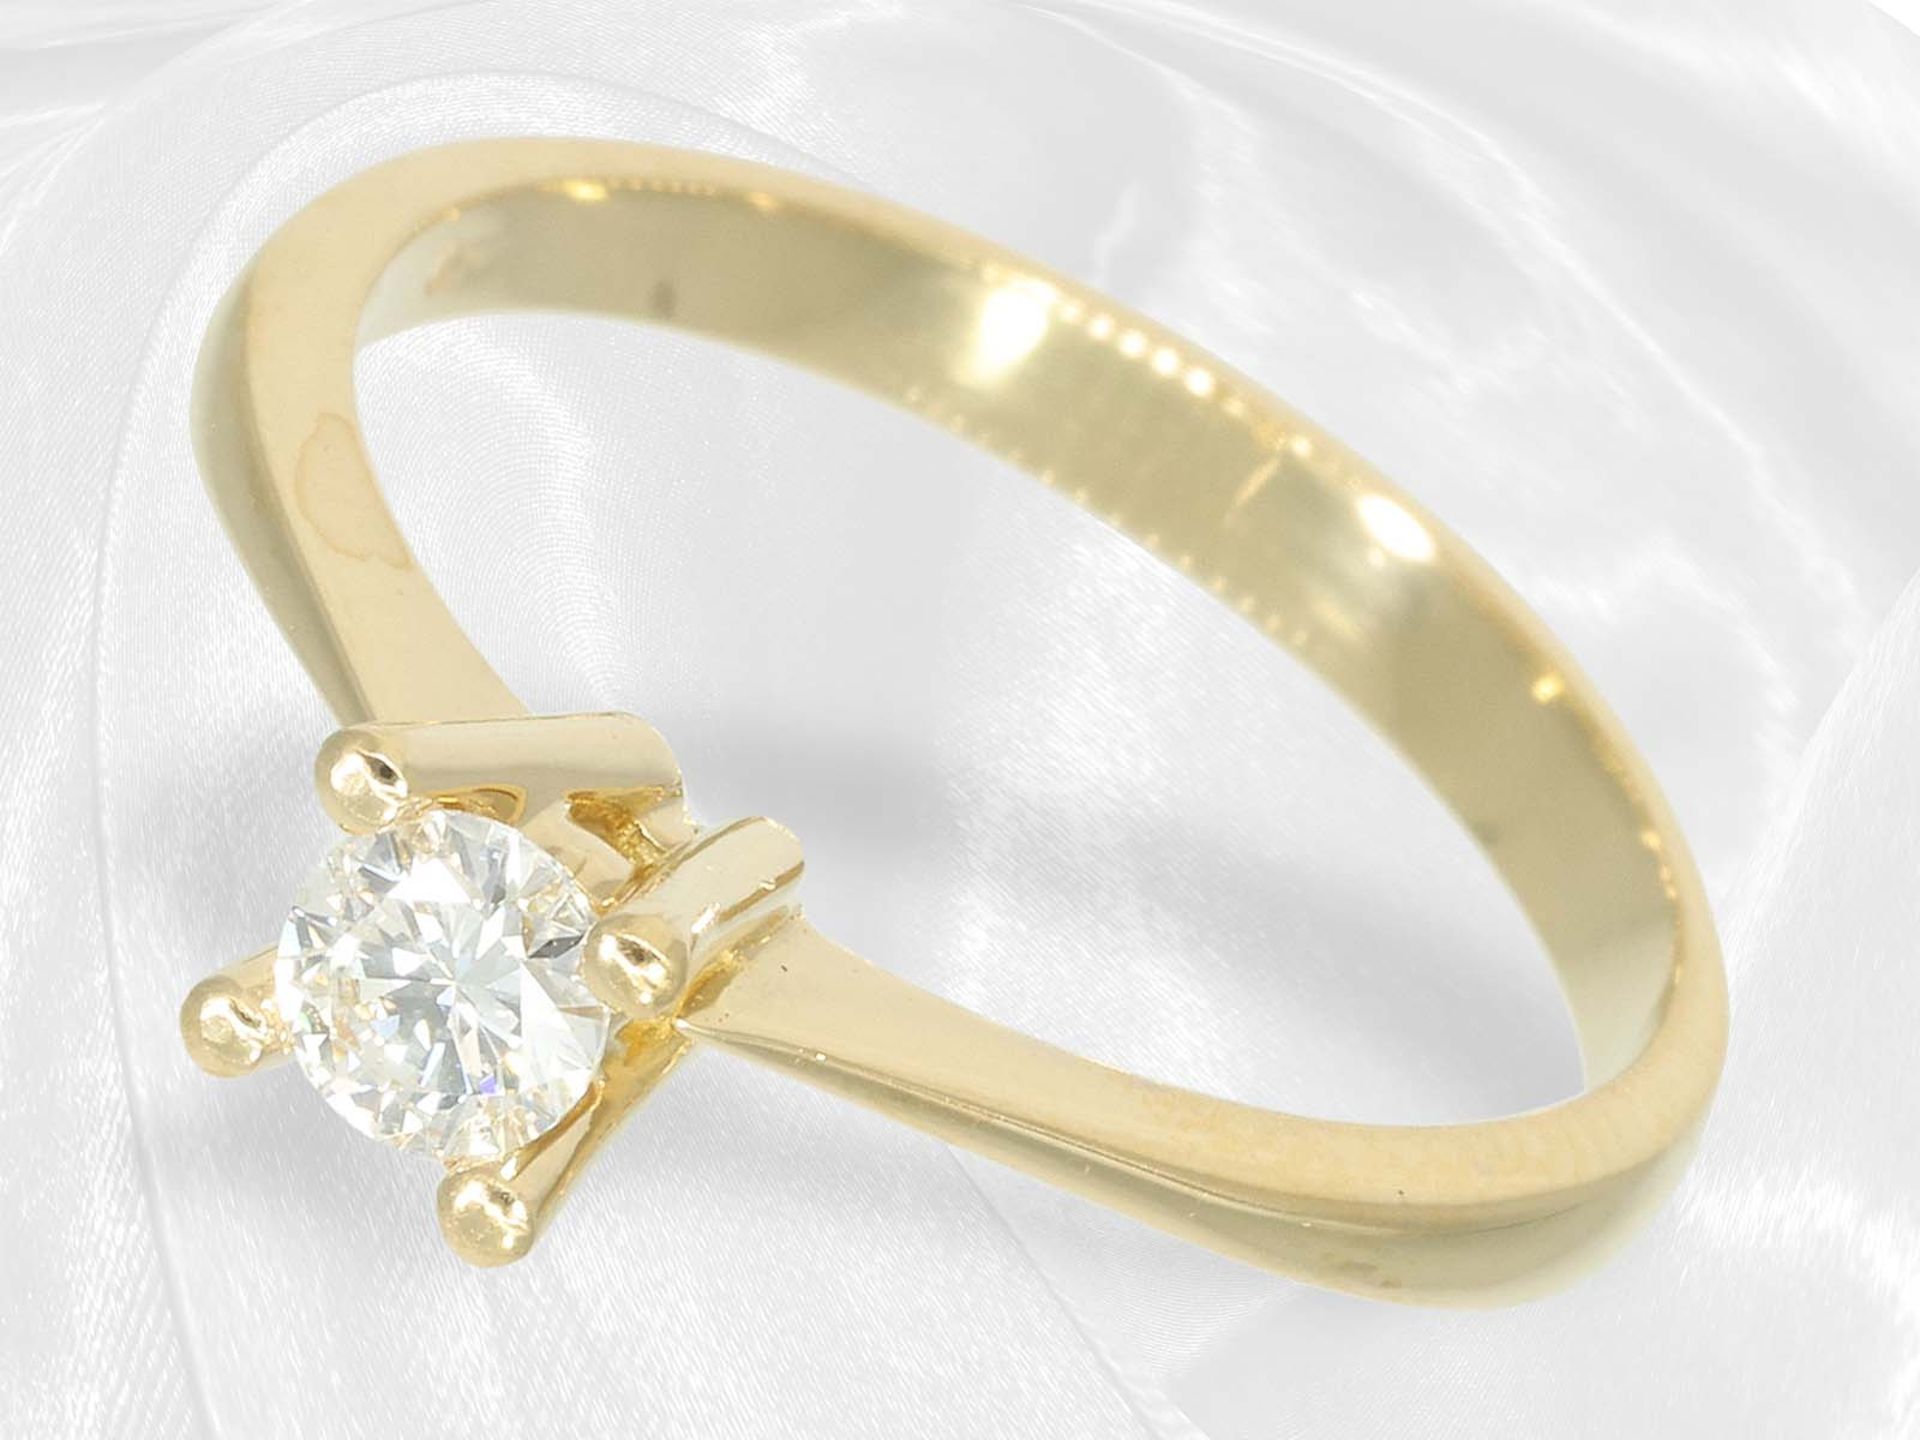 Ring: 18K gold solitaire/brilliant-cut diamond, approx. 0.3ct